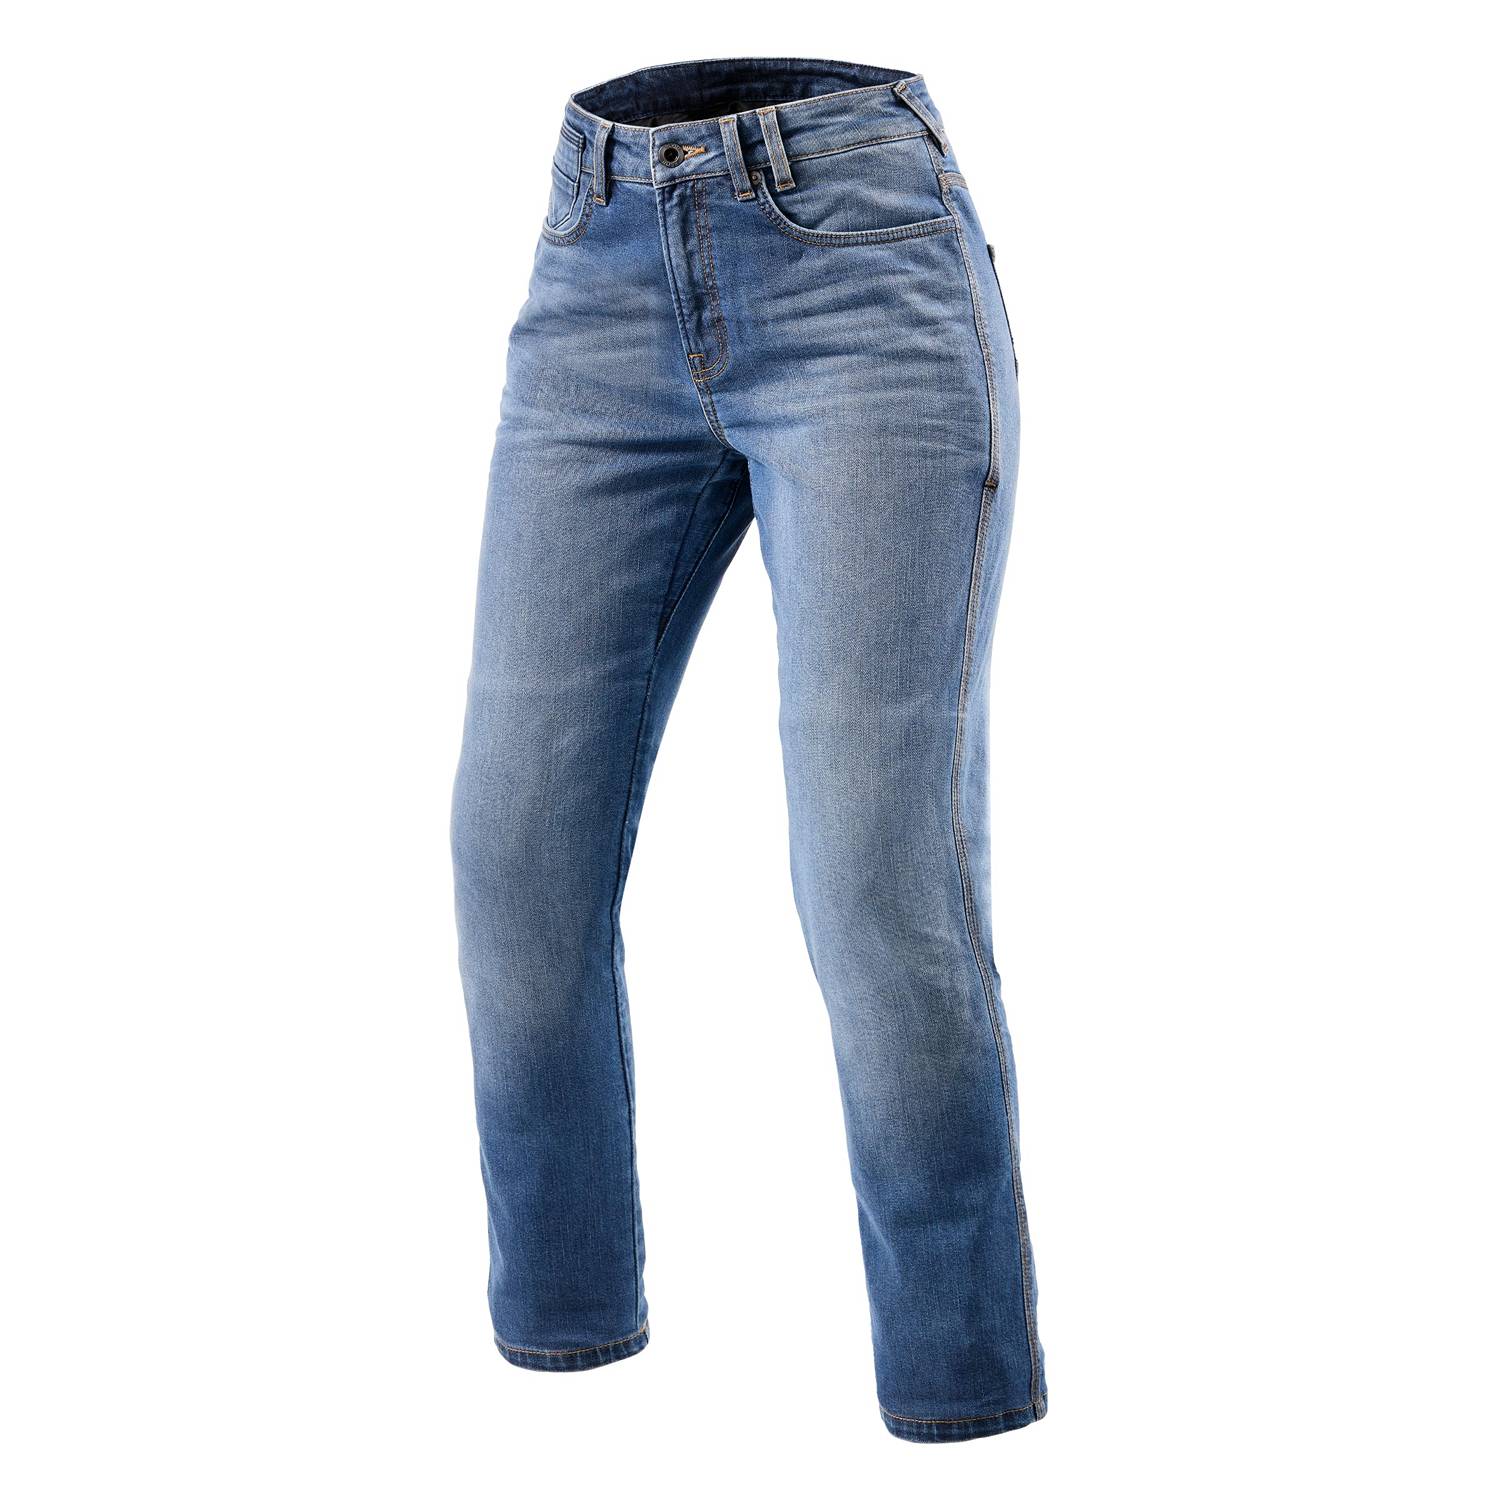 Image of EU REV'IT! Jeans Victoria 2 Ladies SF Classic Blue Used Motorcycle Jeans Taille L30/W28